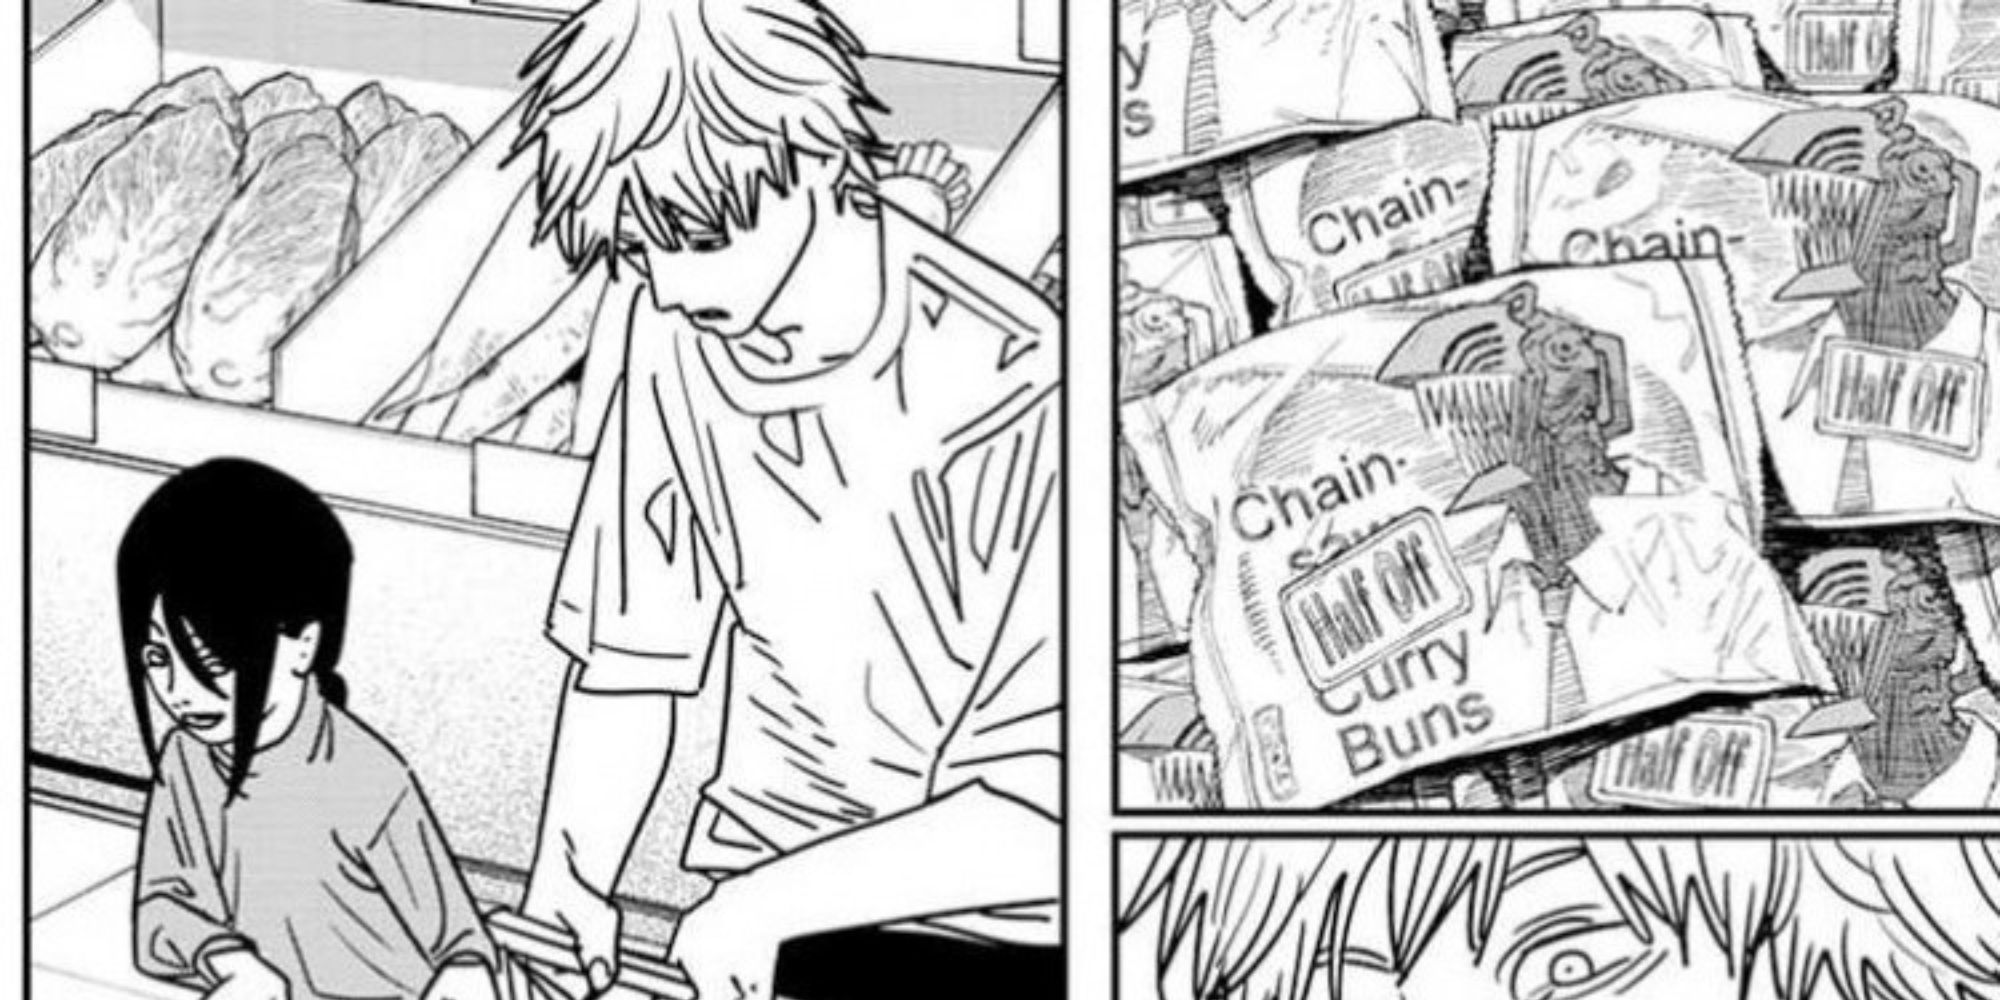 Chainsaw Man chapter 142 release date and time